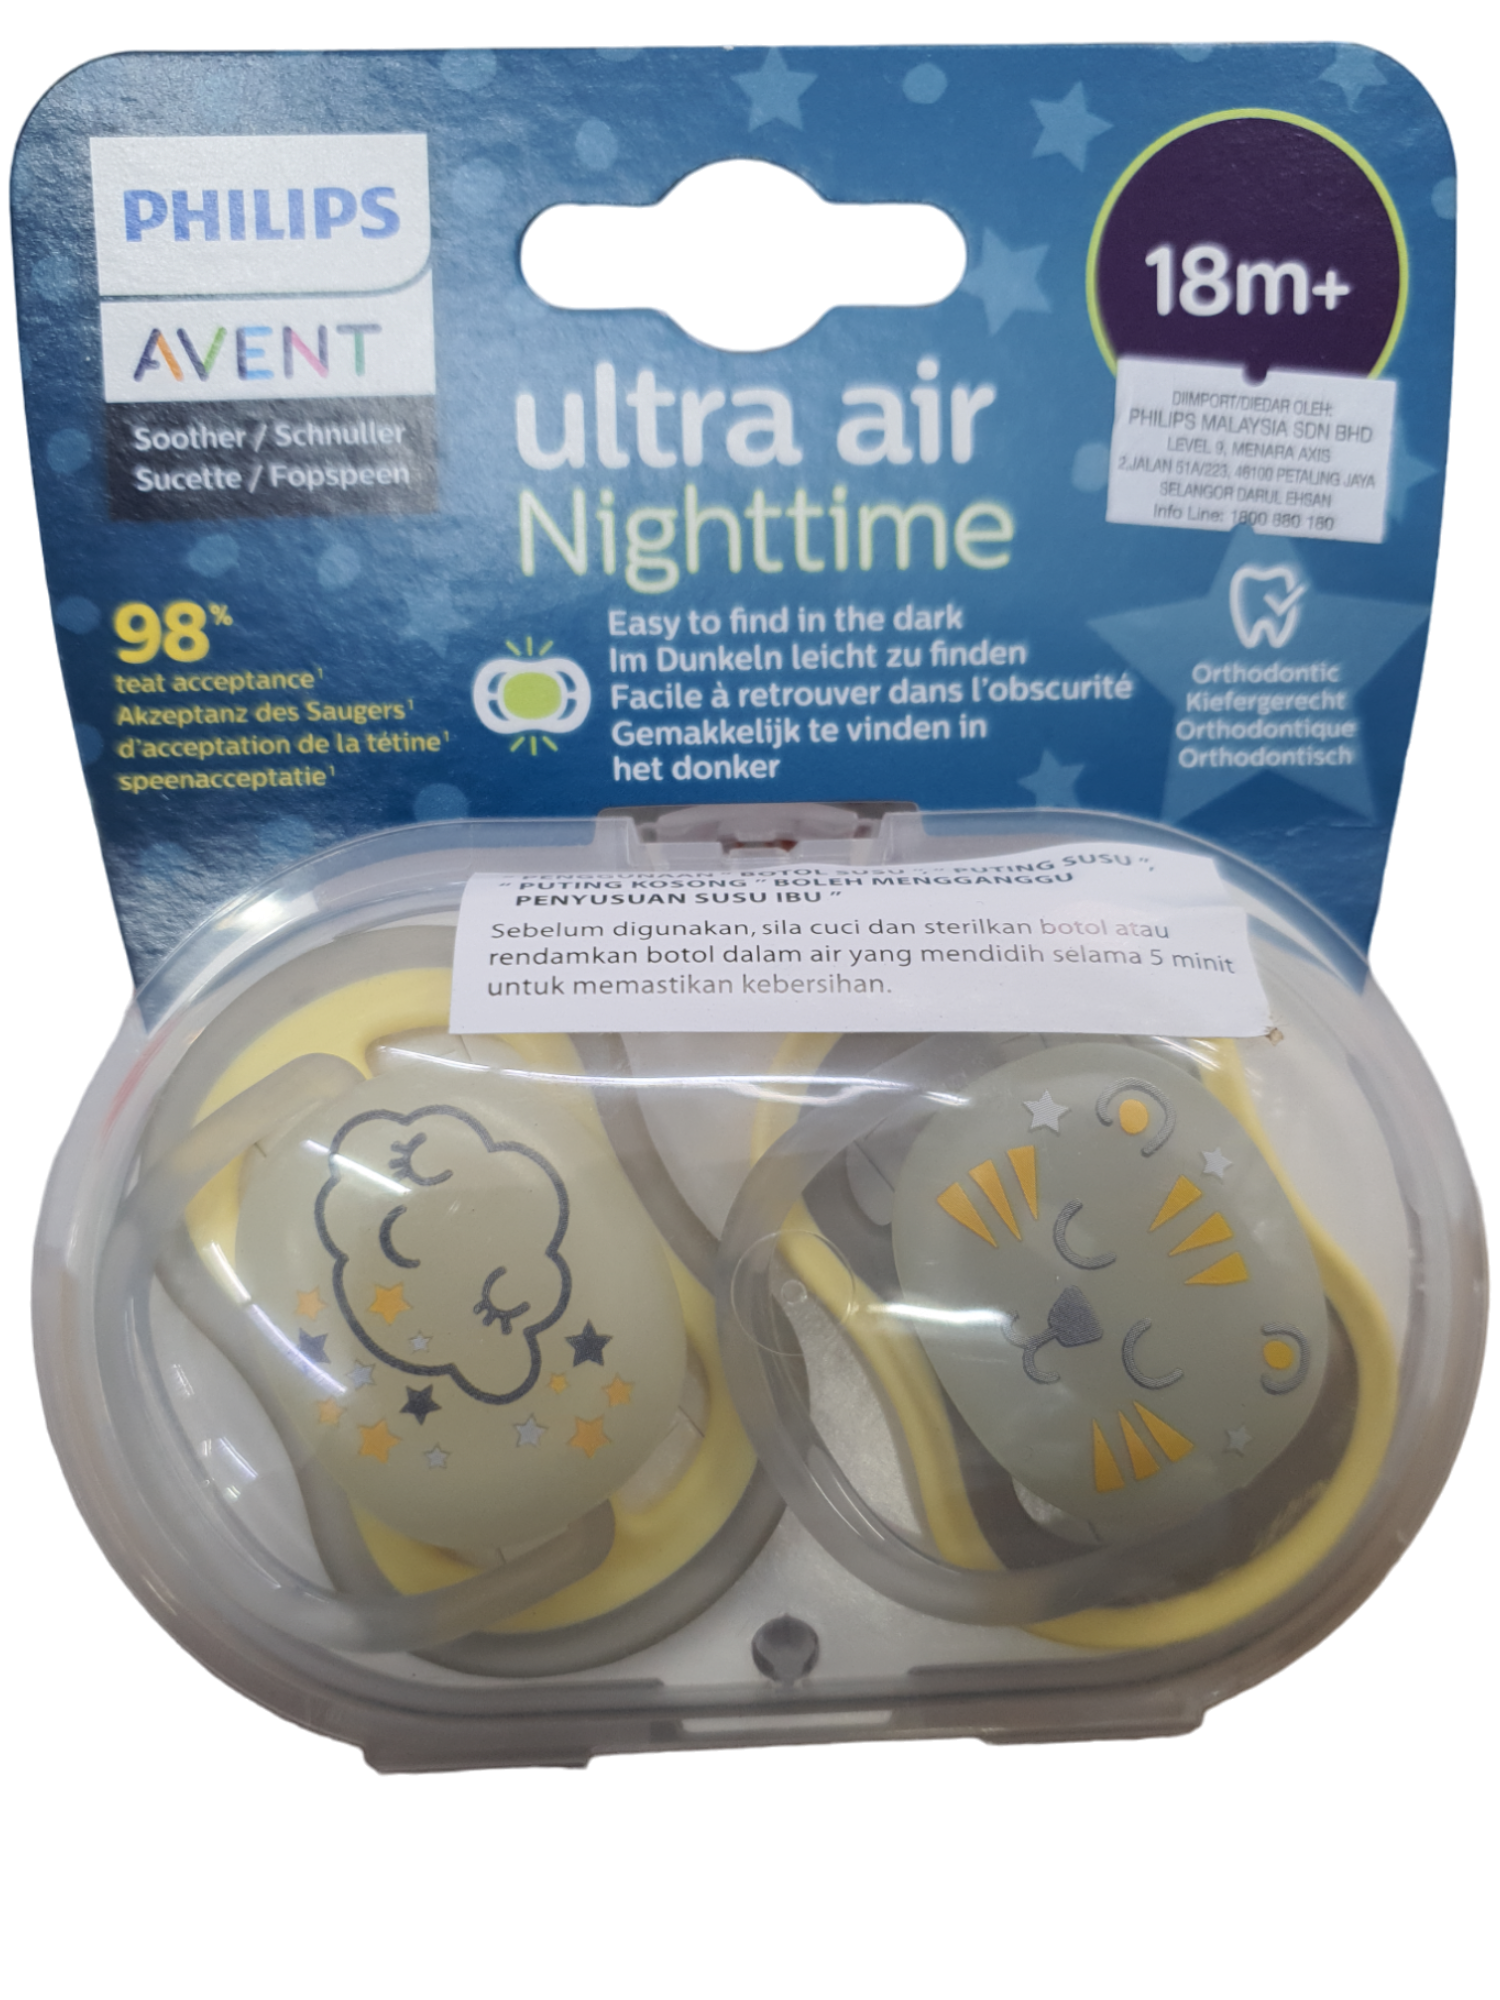 PHILIPS AVENT ULTRA AIR NIGHT TIME PACIFIERS 18M+